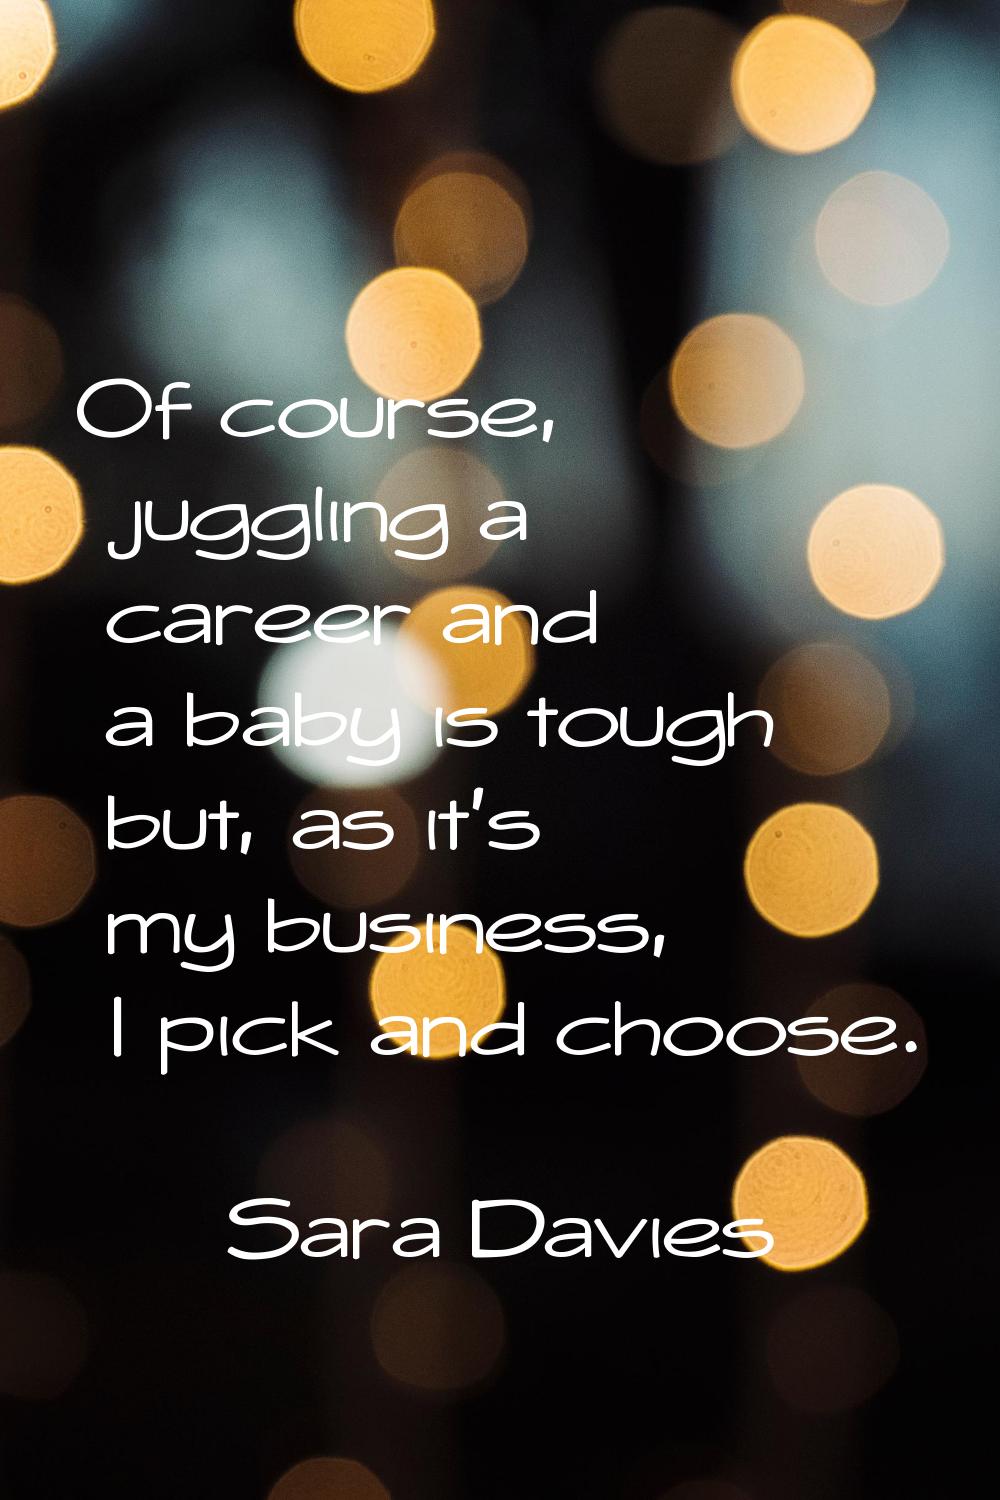 Of course, juggling a career and a baby is tough but, as it's my business, I pick and choose.